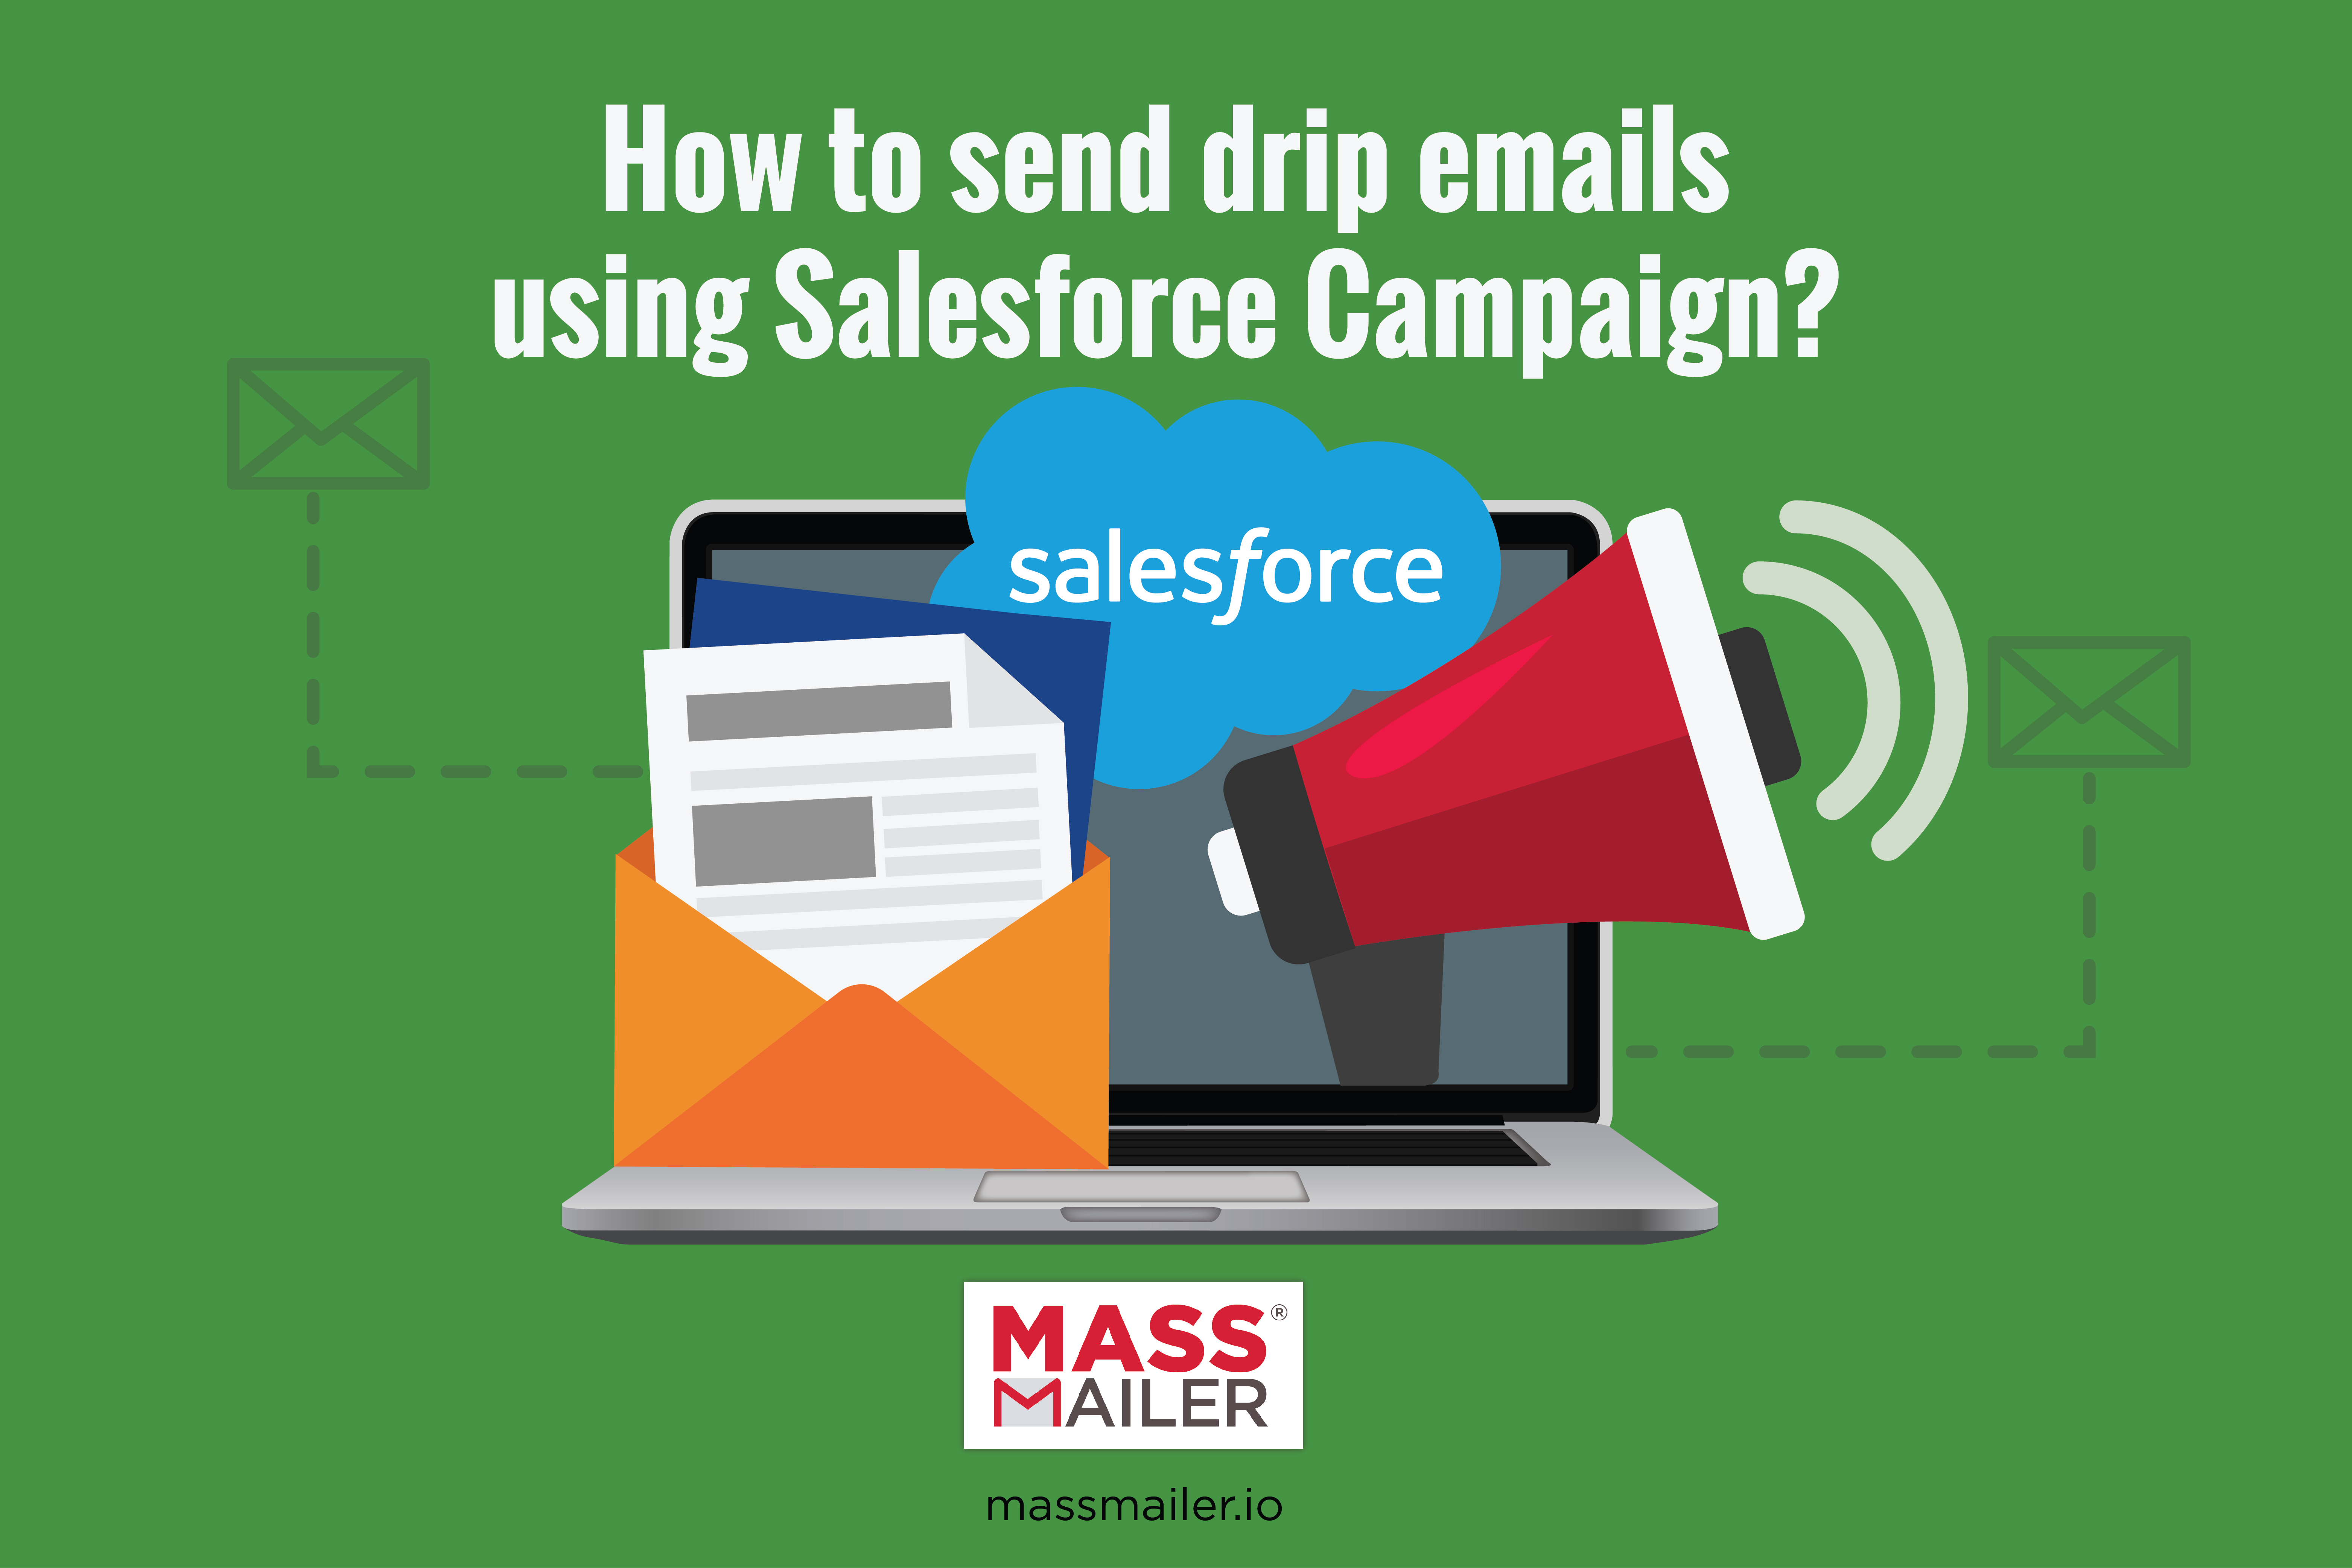 How to send drip emails using Salesforce Campaign?